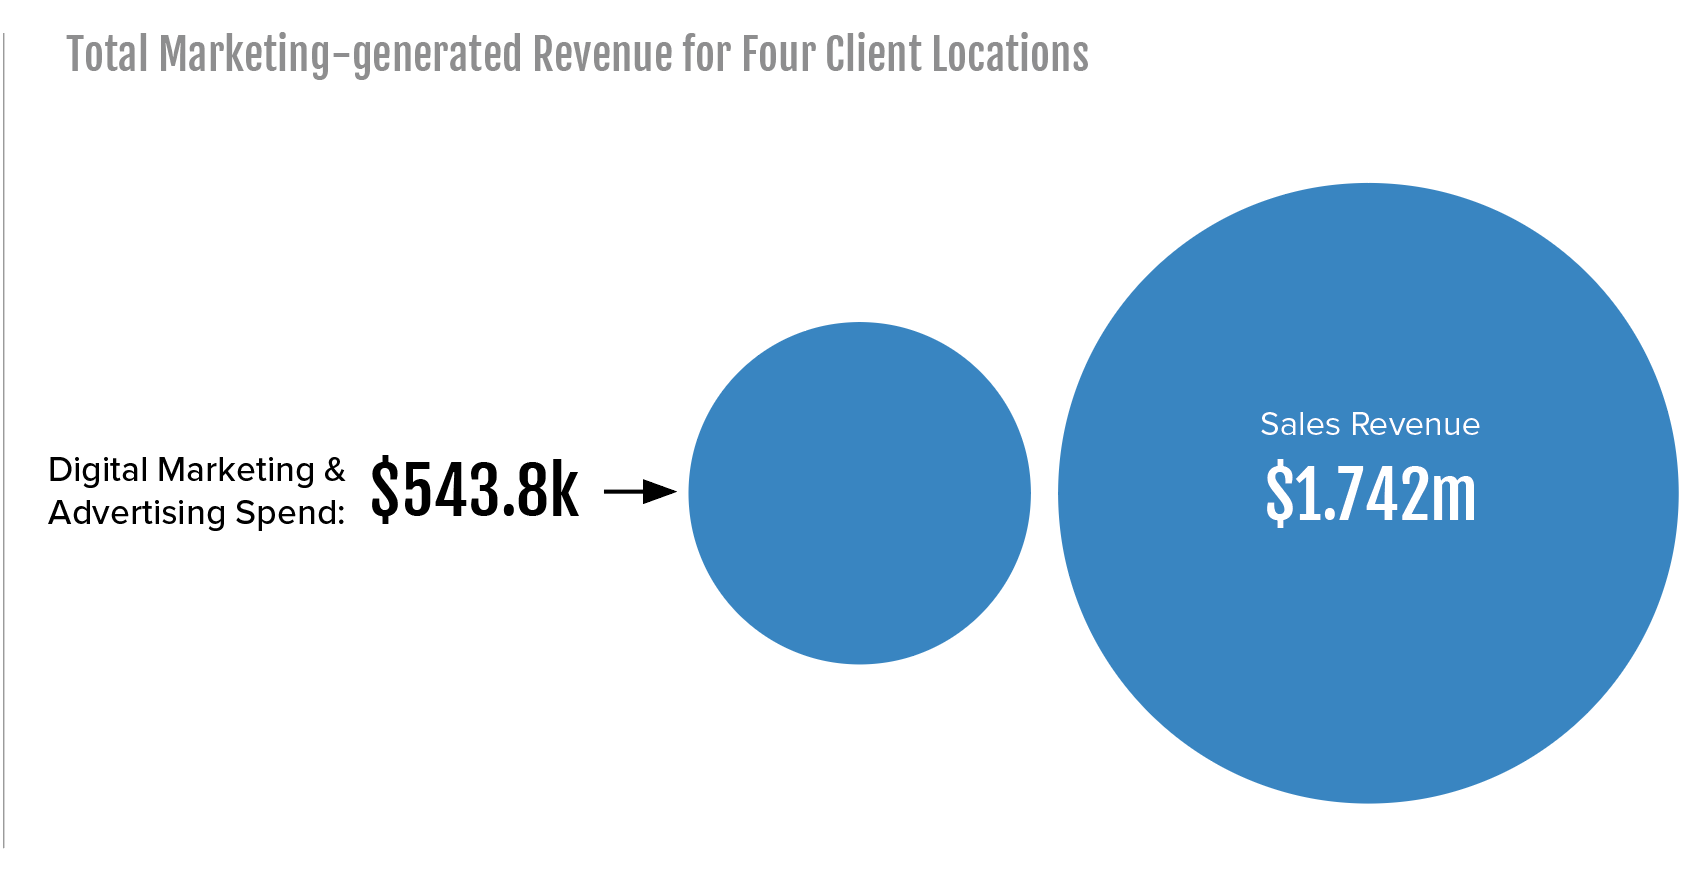 total marketing generated revenue for 4 client locations